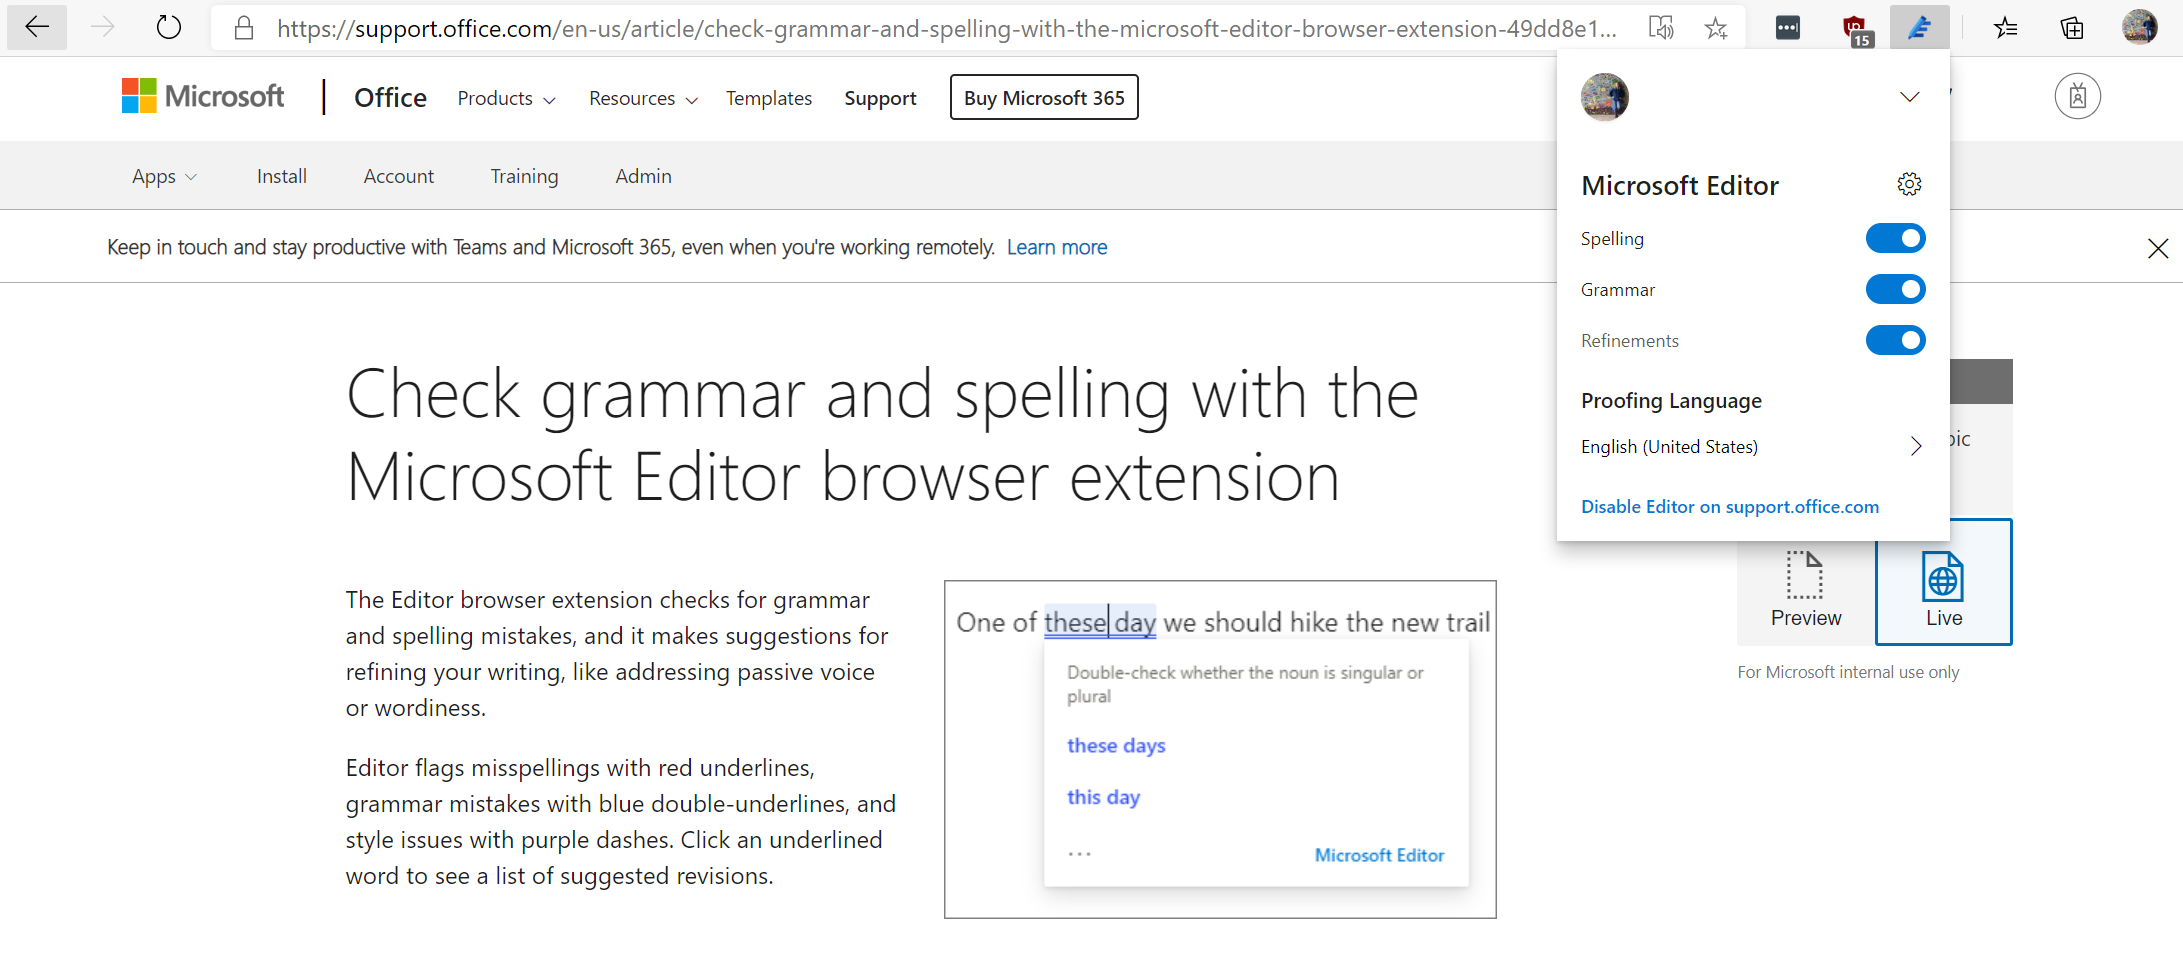 Open your browser's Extensions or Add-ons settings.
Review the list of installed extensions.